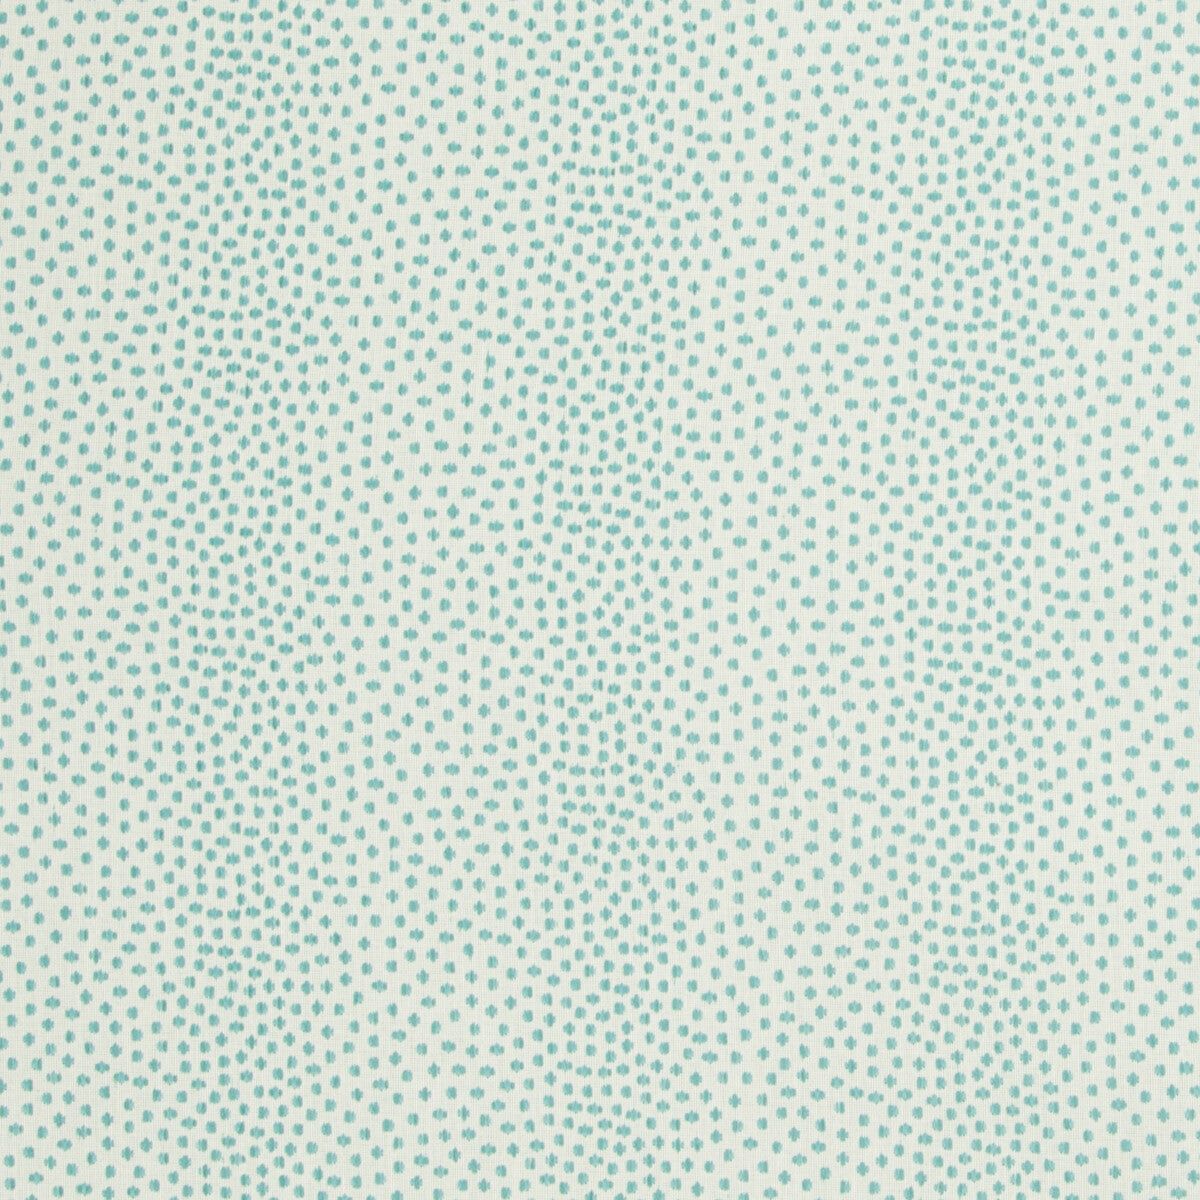 Kravet Contract fabric in 34748-35 color - pattern 34748.35.0 - by Kravet Contract in the Crypton Incase collection